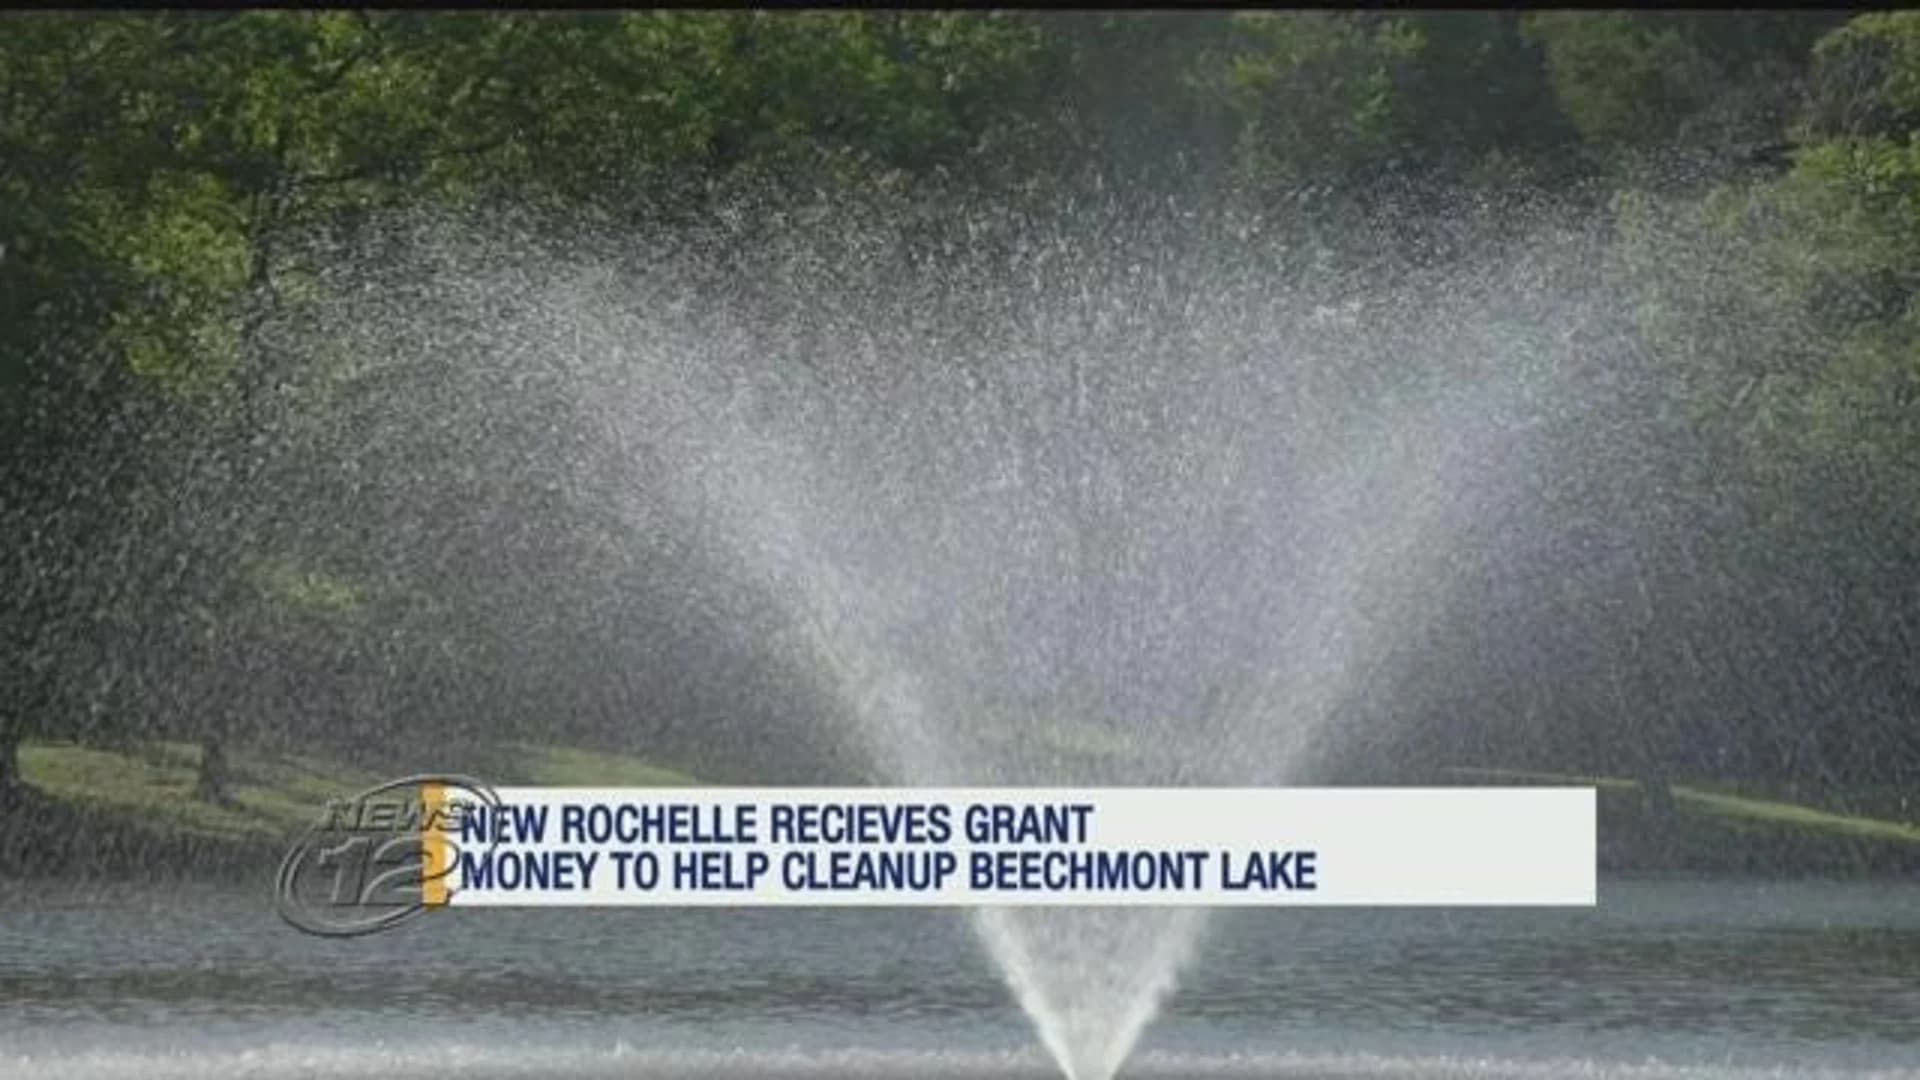 New Rochelle gets $250,000 grant for Beechmont Lake